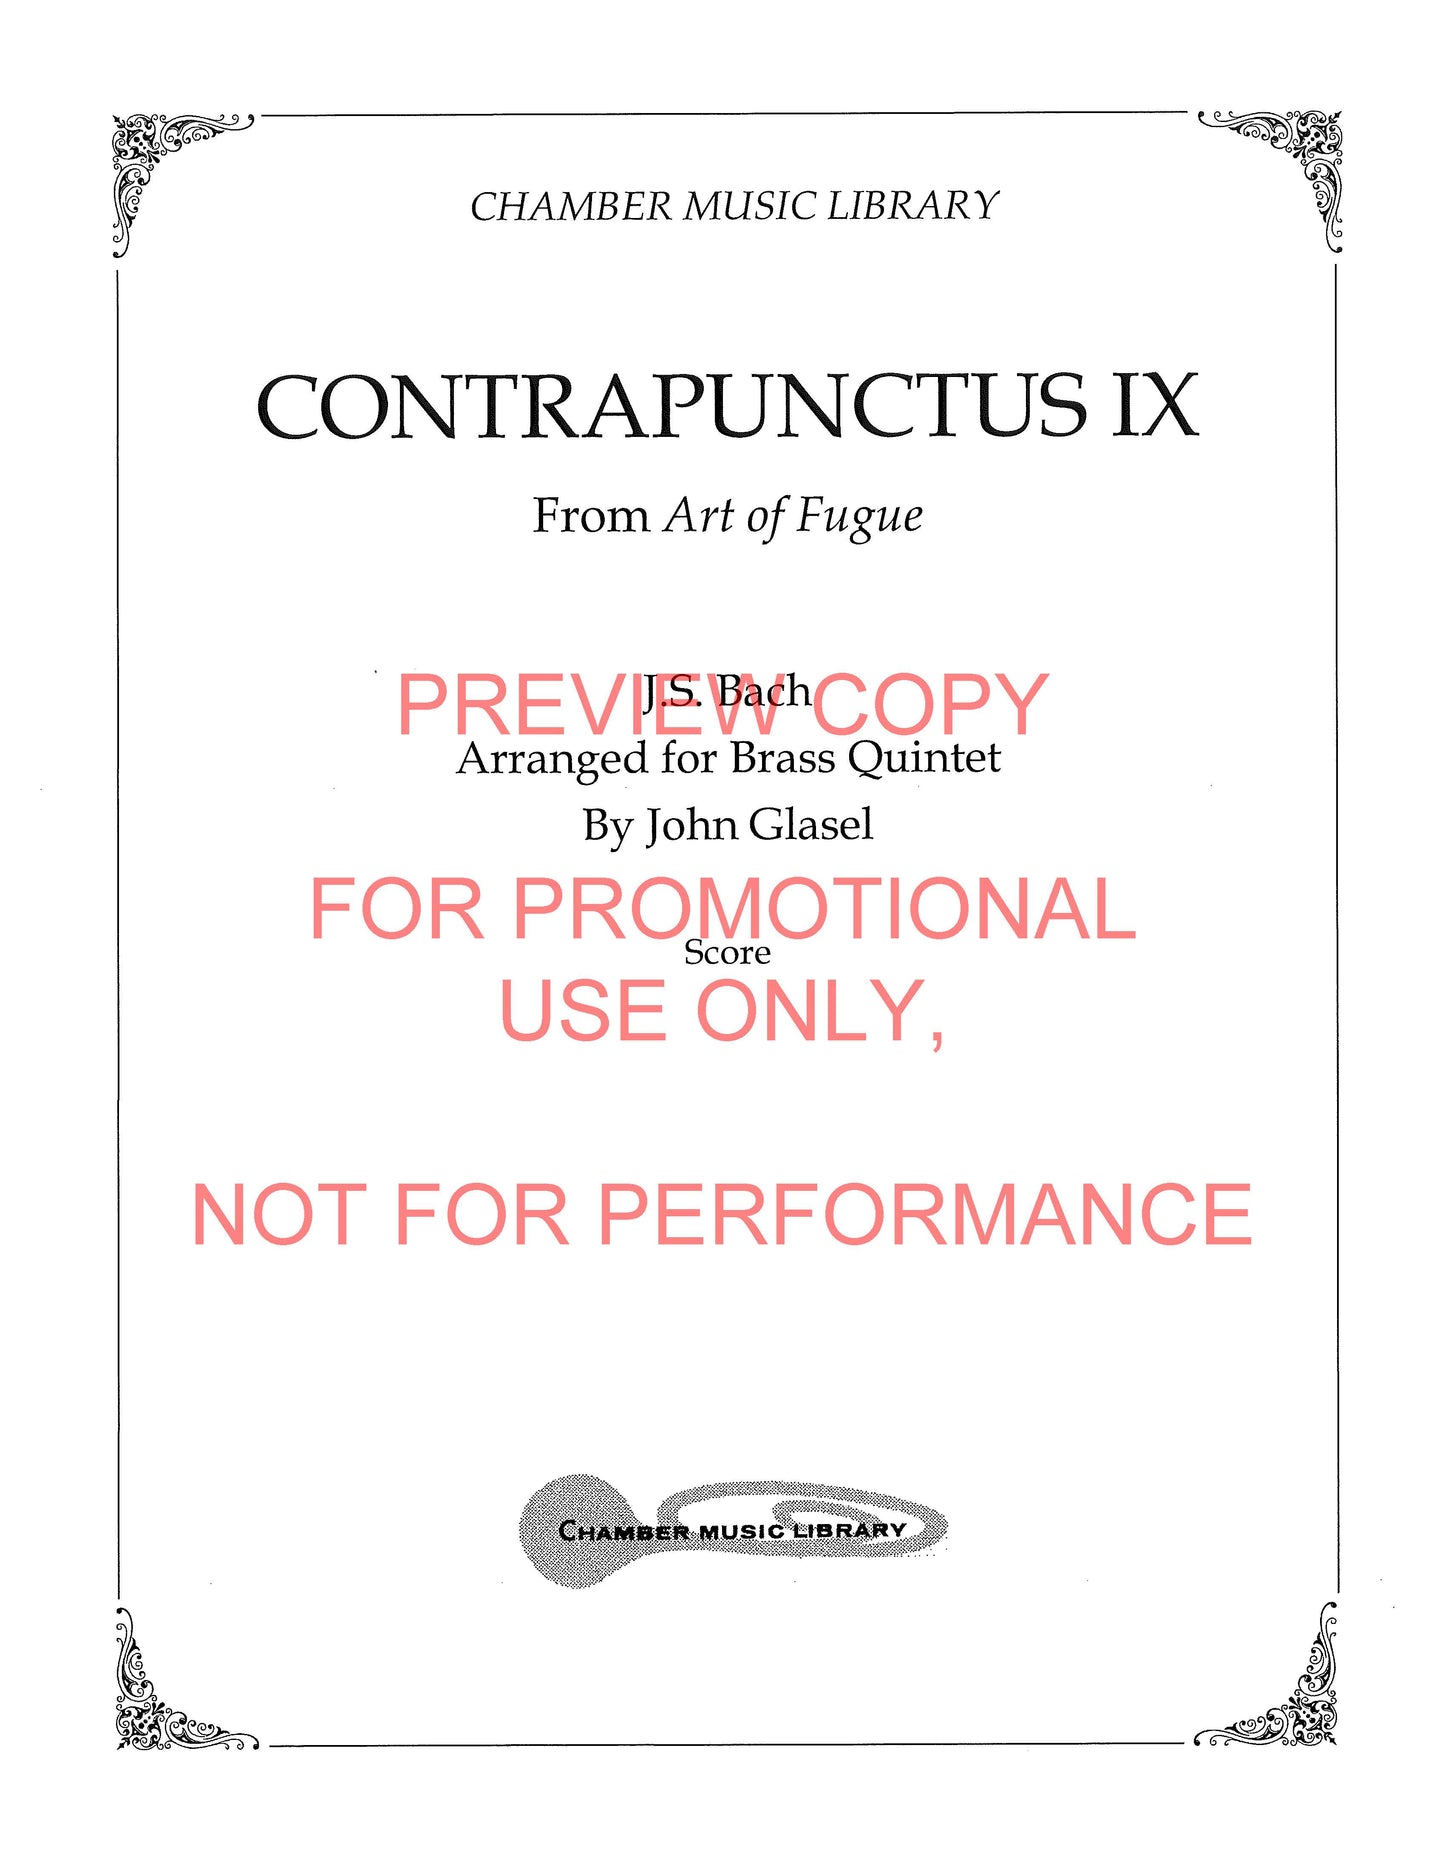 Contrapunctus IX from Bach's Art of Fugue for Brass Quintet